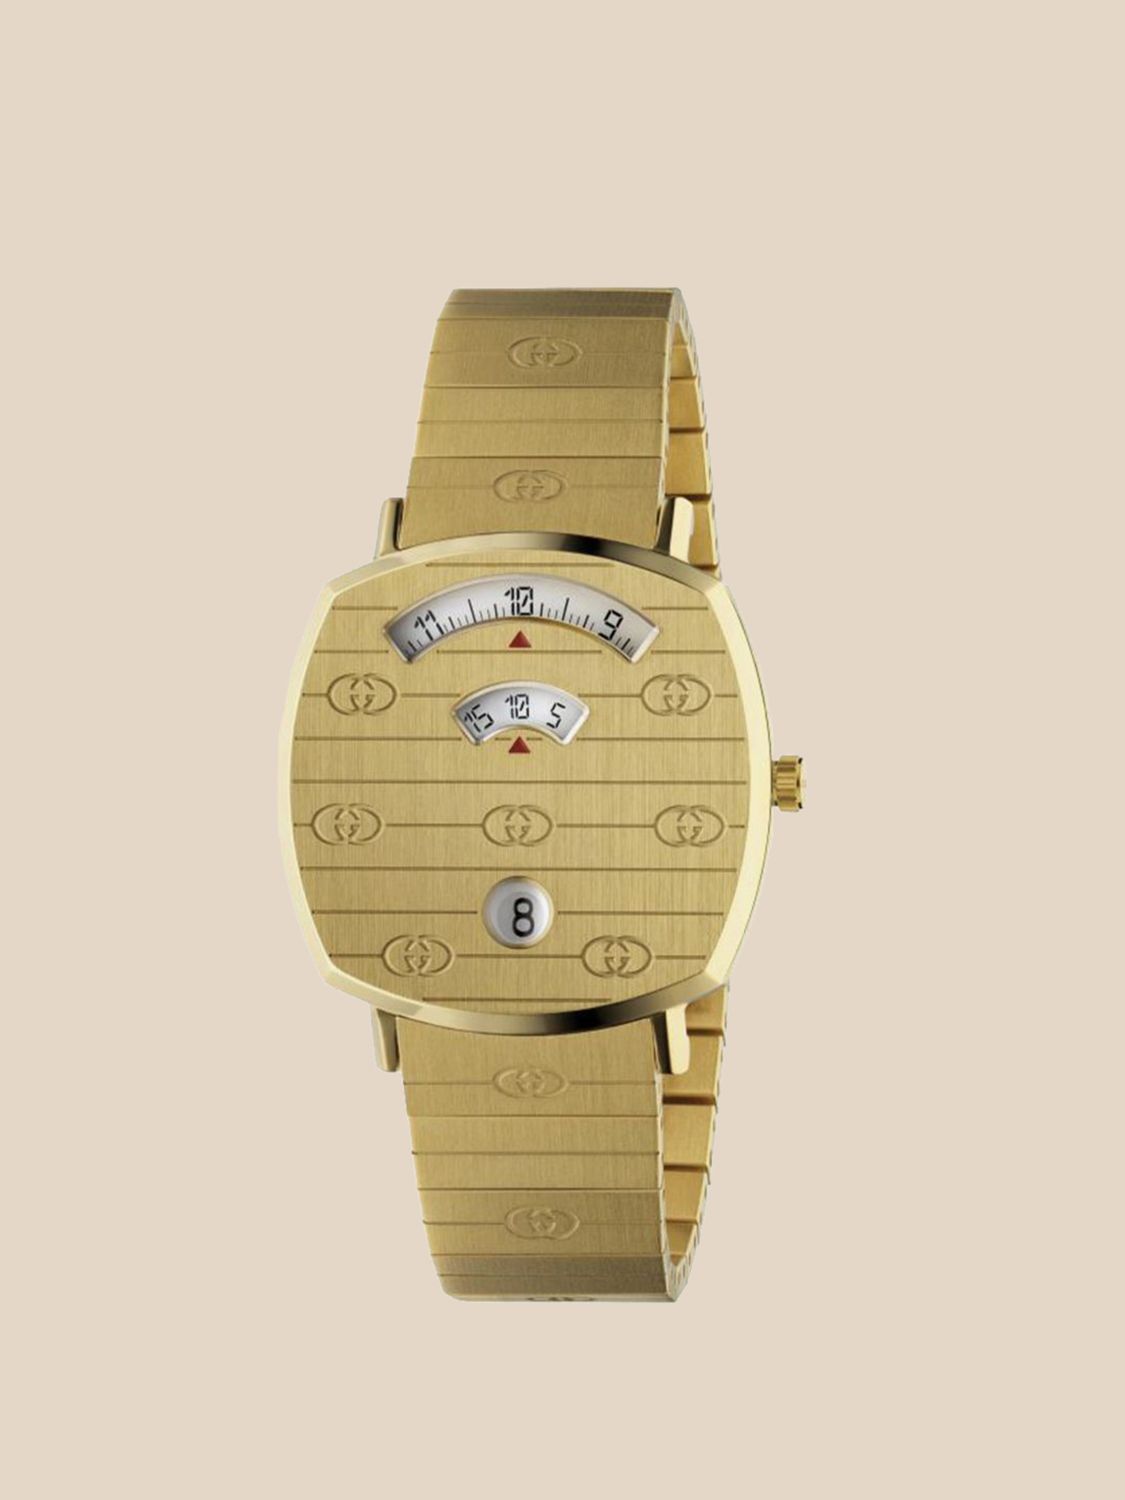 lovende overbelastning Begrænse GUCCI: Grip watch with GG engravings | Watch Gucci Men Gold | Watch Gucci  YA157403 GIGLIO.COM